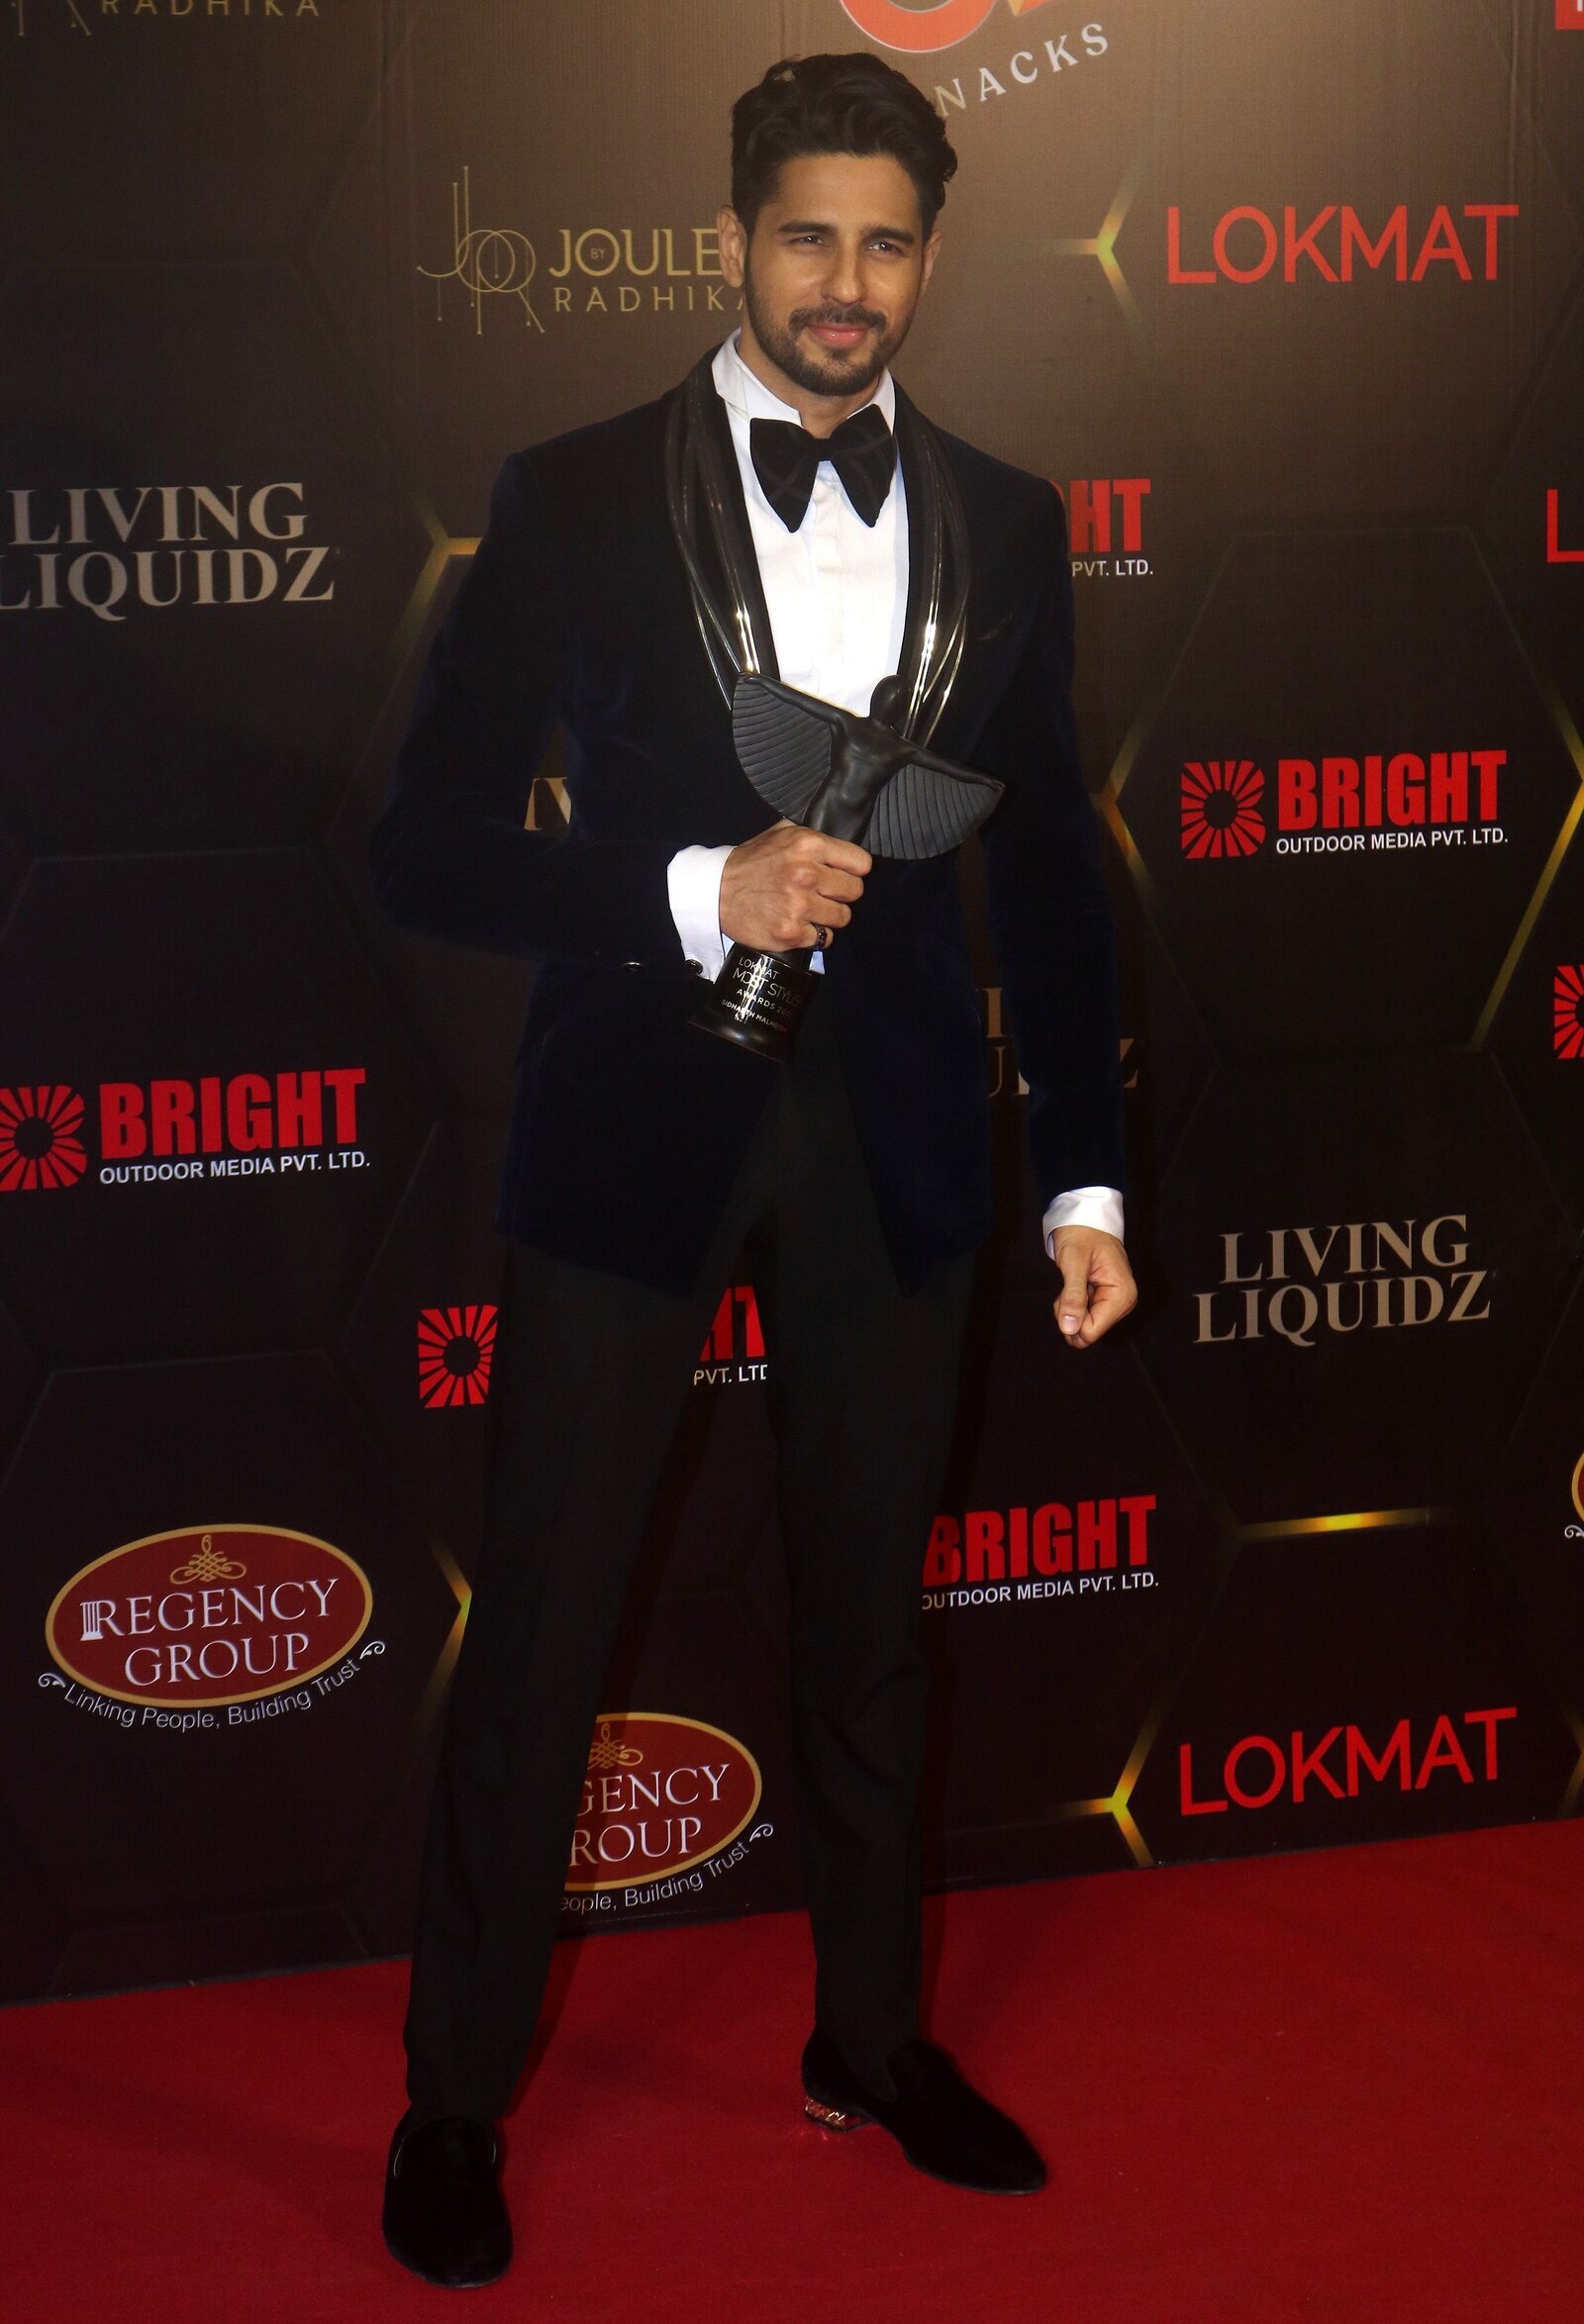 Sidharth Malhotra - Photos: Celebs At The Lokmat Most Stylish Awards 2021 | Picture 1845718